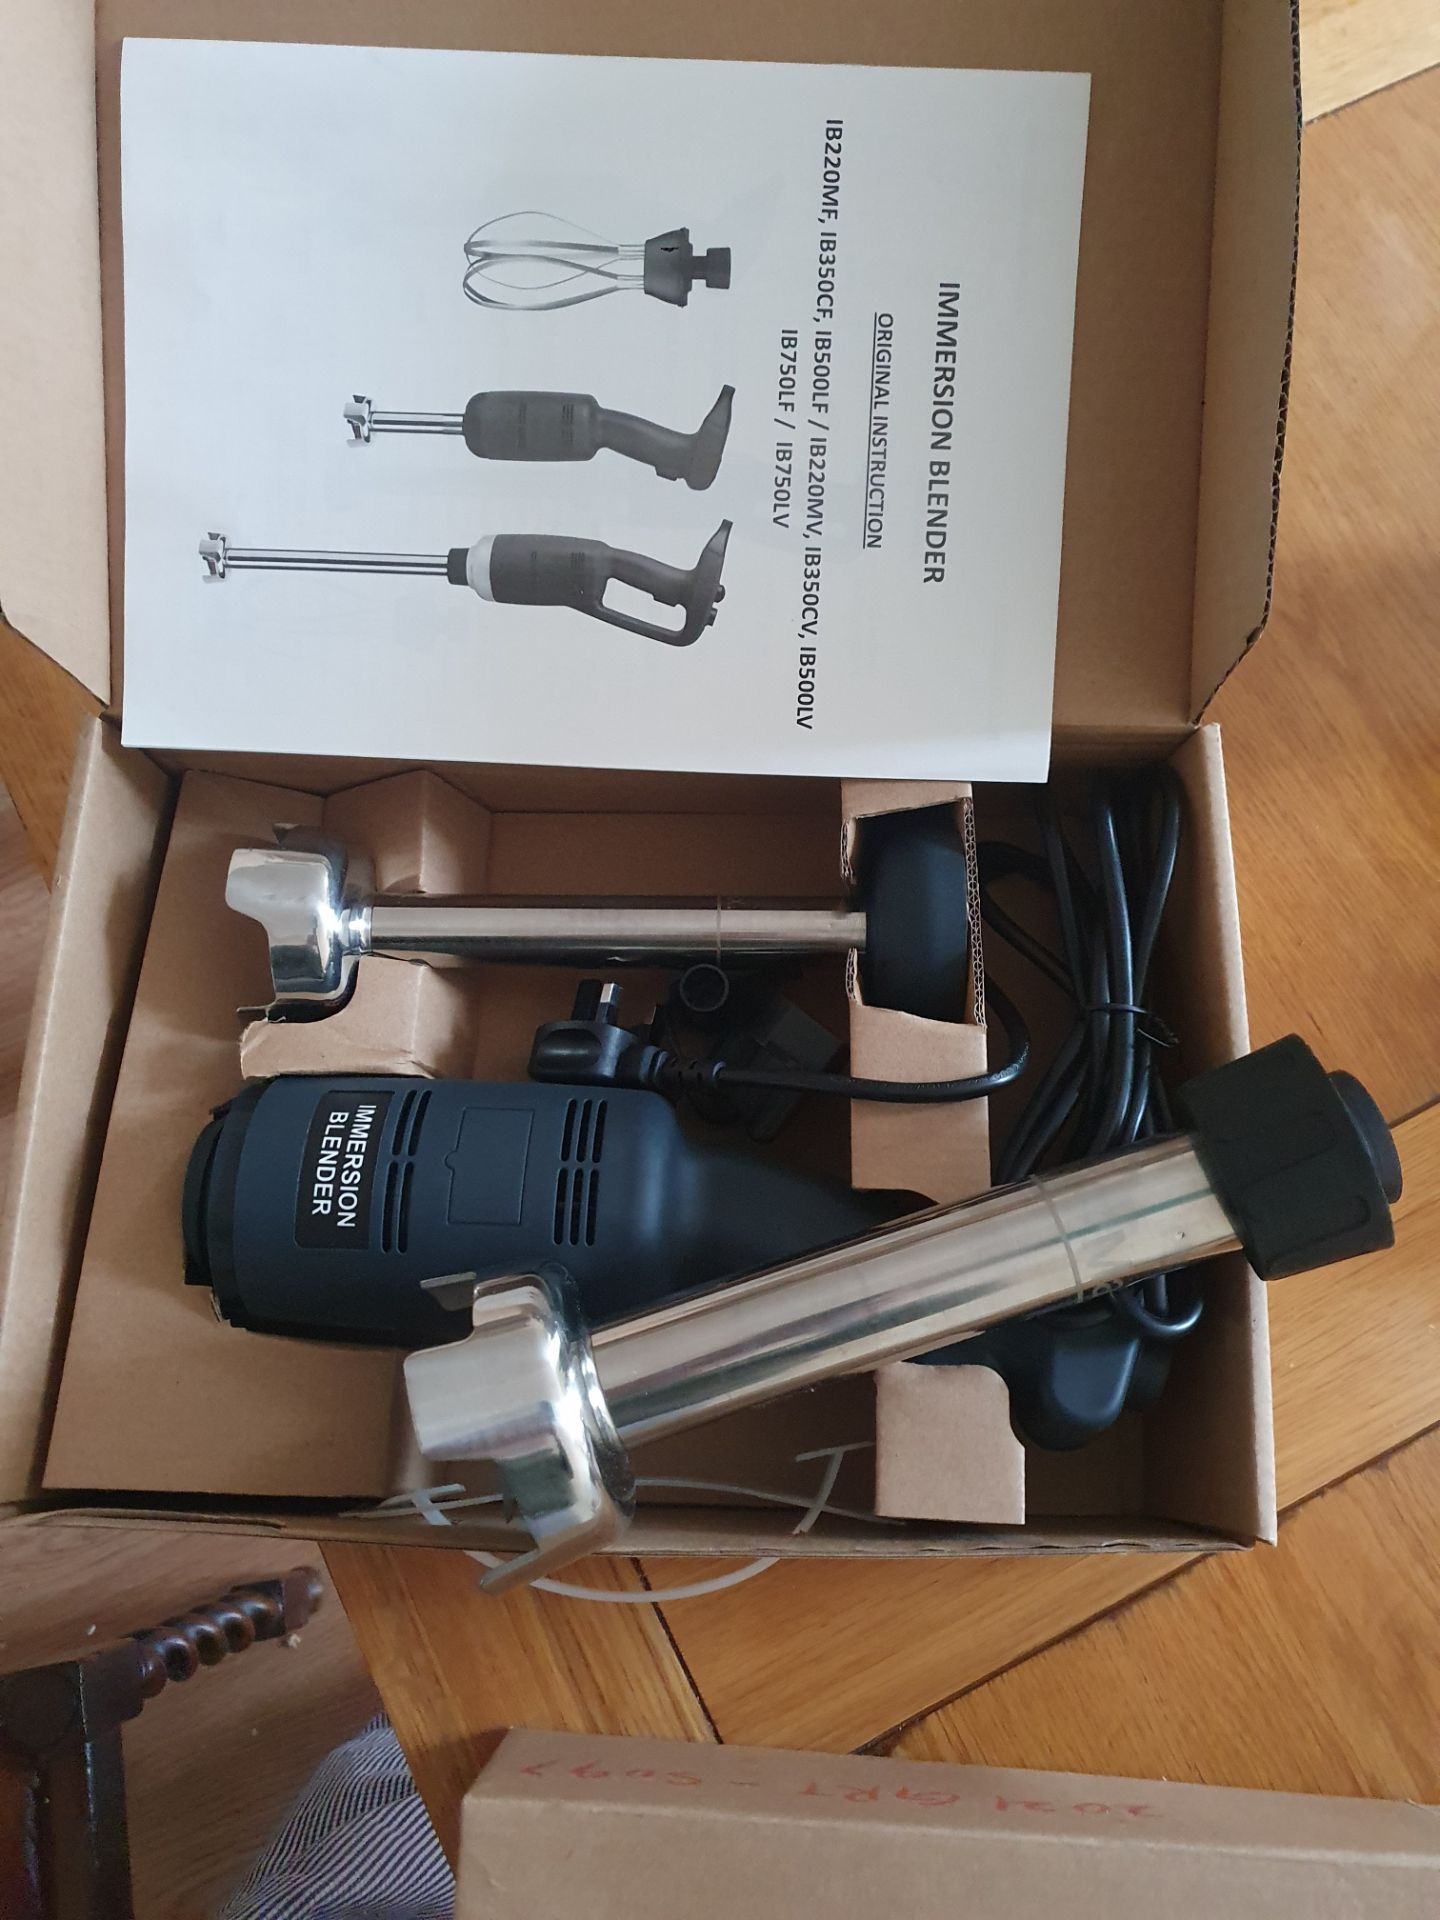 Immersion Blender With Interchangeable Blades - Image 4 of 5